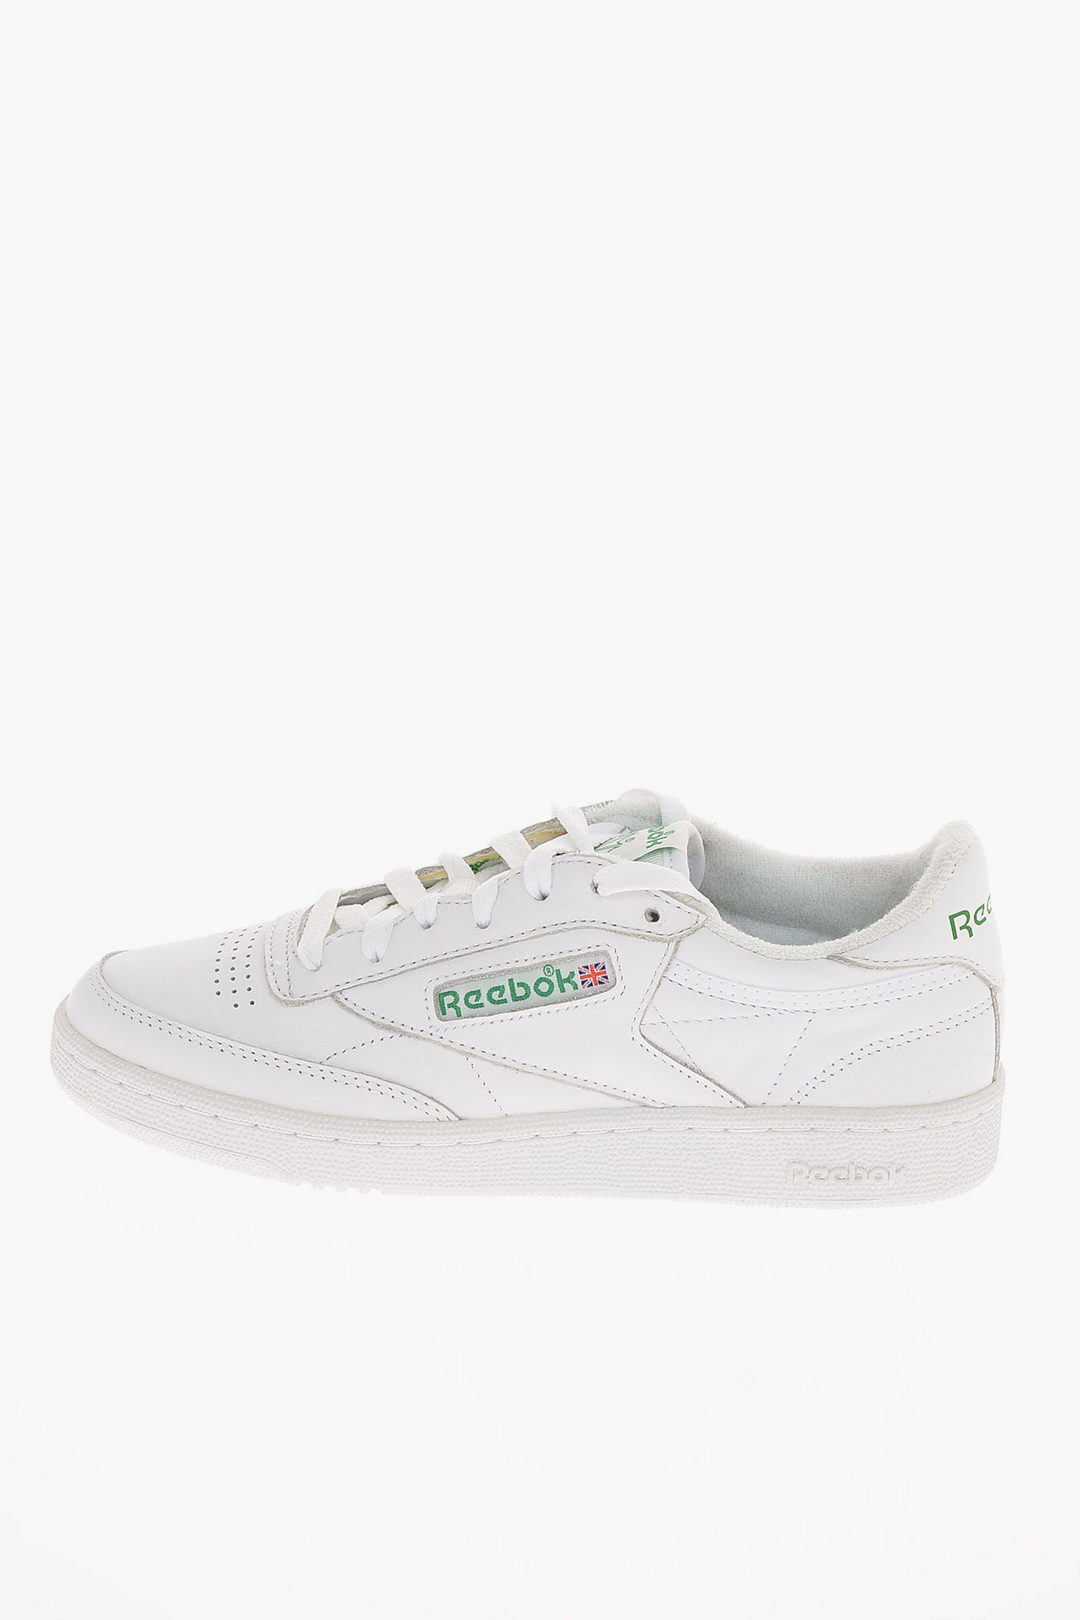 Reebok leather CLUB C 85 ARCHIVE Sneakers women - Glamood Outlet